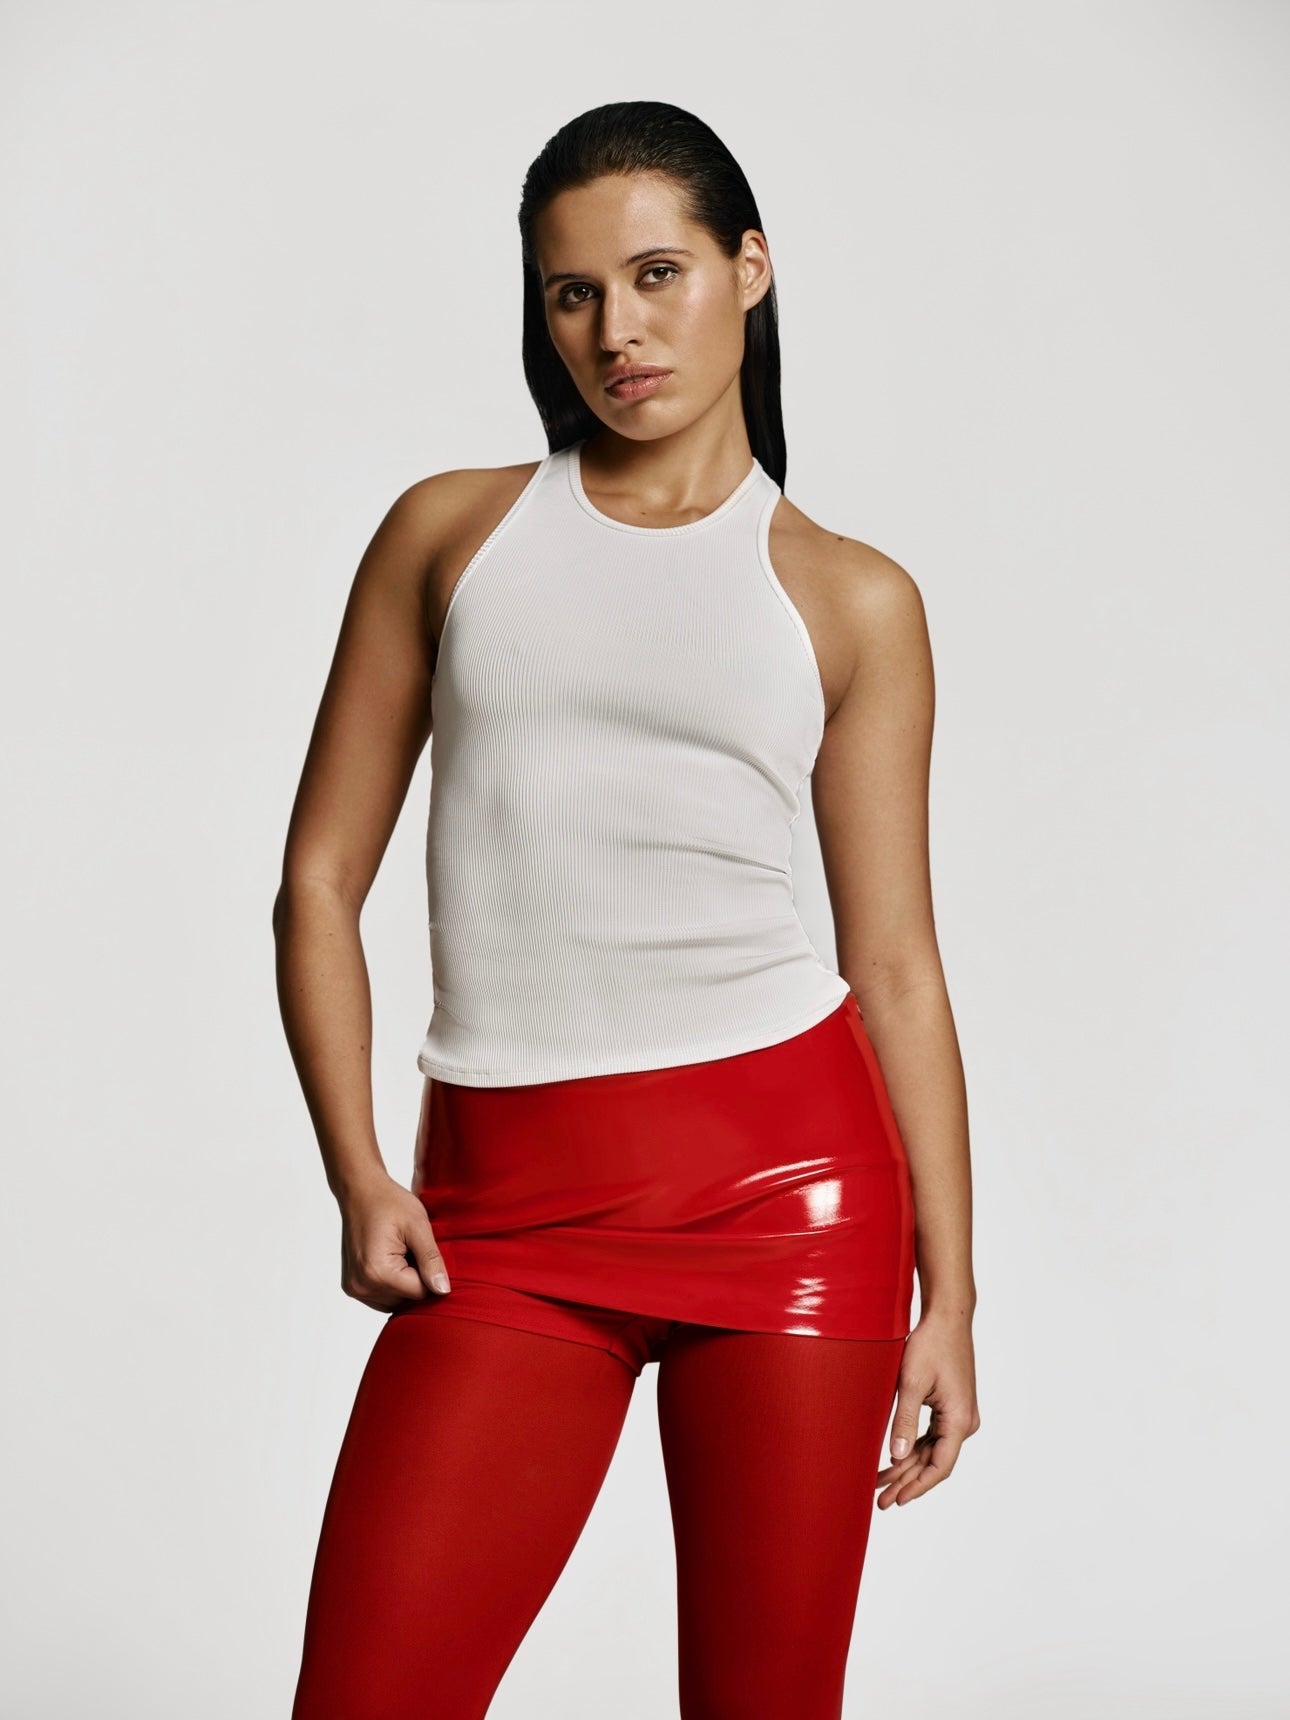 Medium full shot of a girl in a white viscose top, a red patent vegan leather mini skort and red tights